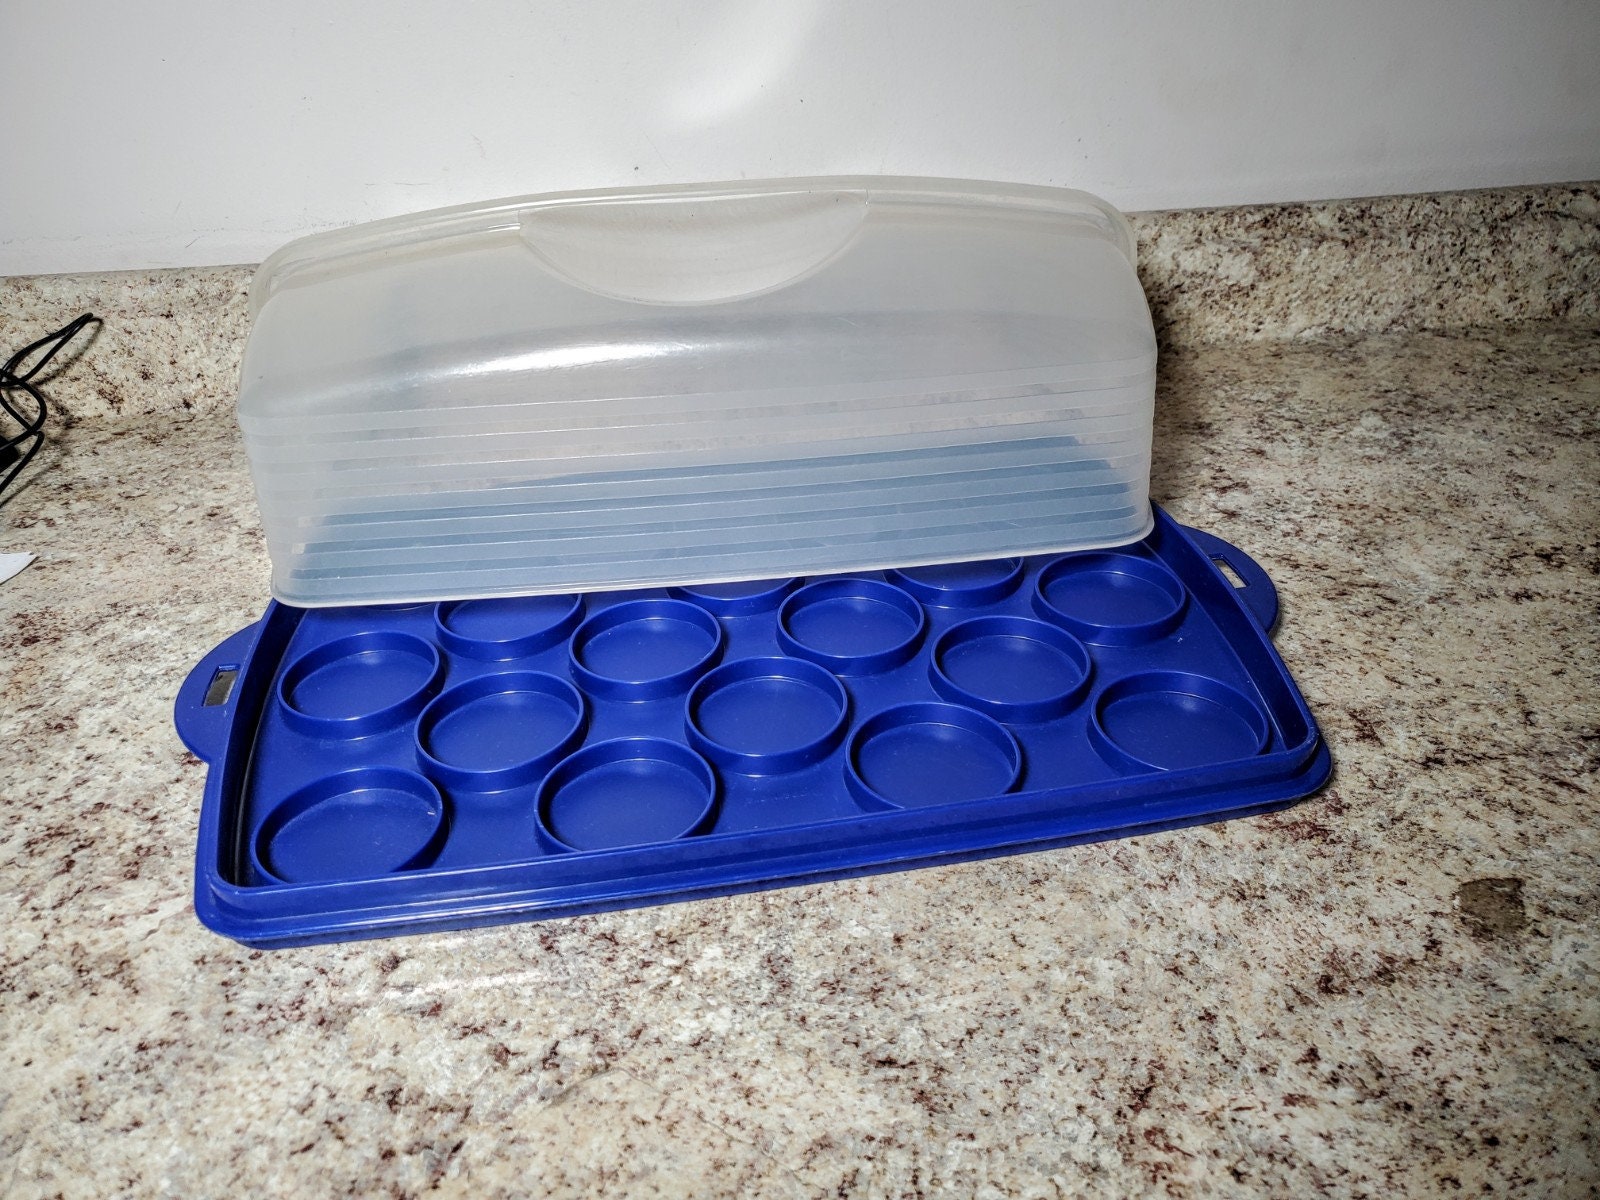 VTG Tupperware Storage Containers Large Round Cake 13x6 and Square 9x3 with  Lids